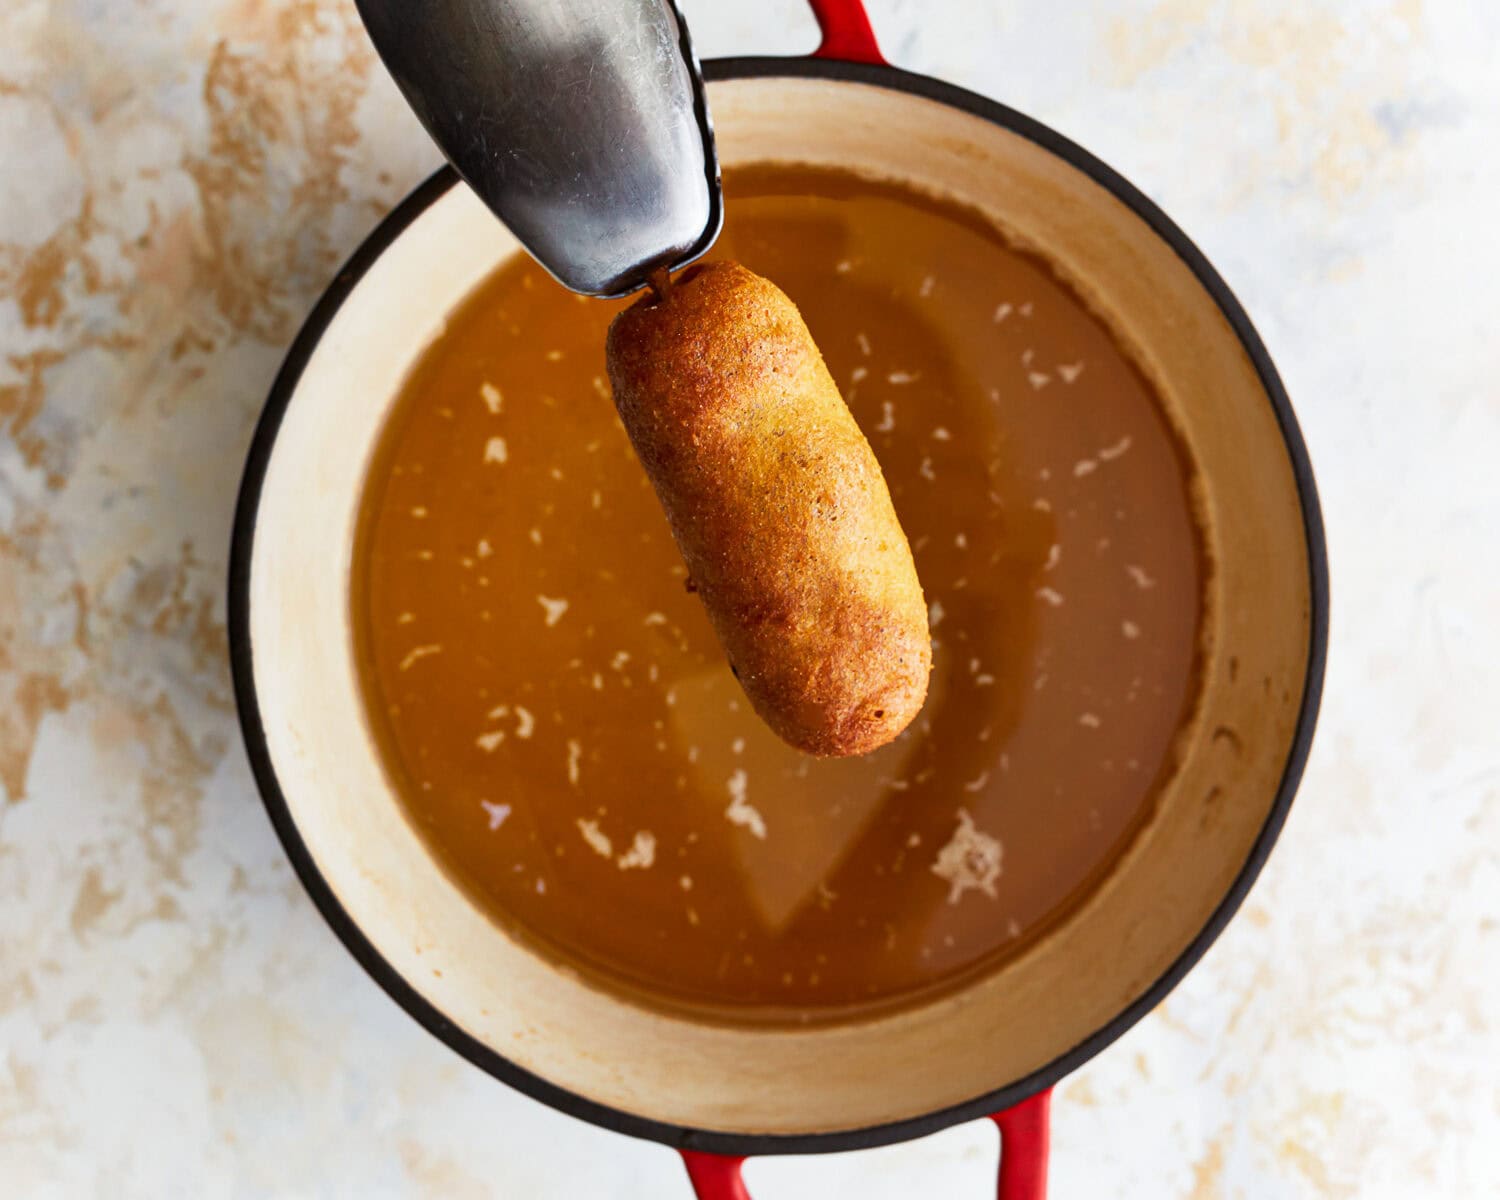 holding a cooked corn dog over a pot of oil with tongs.